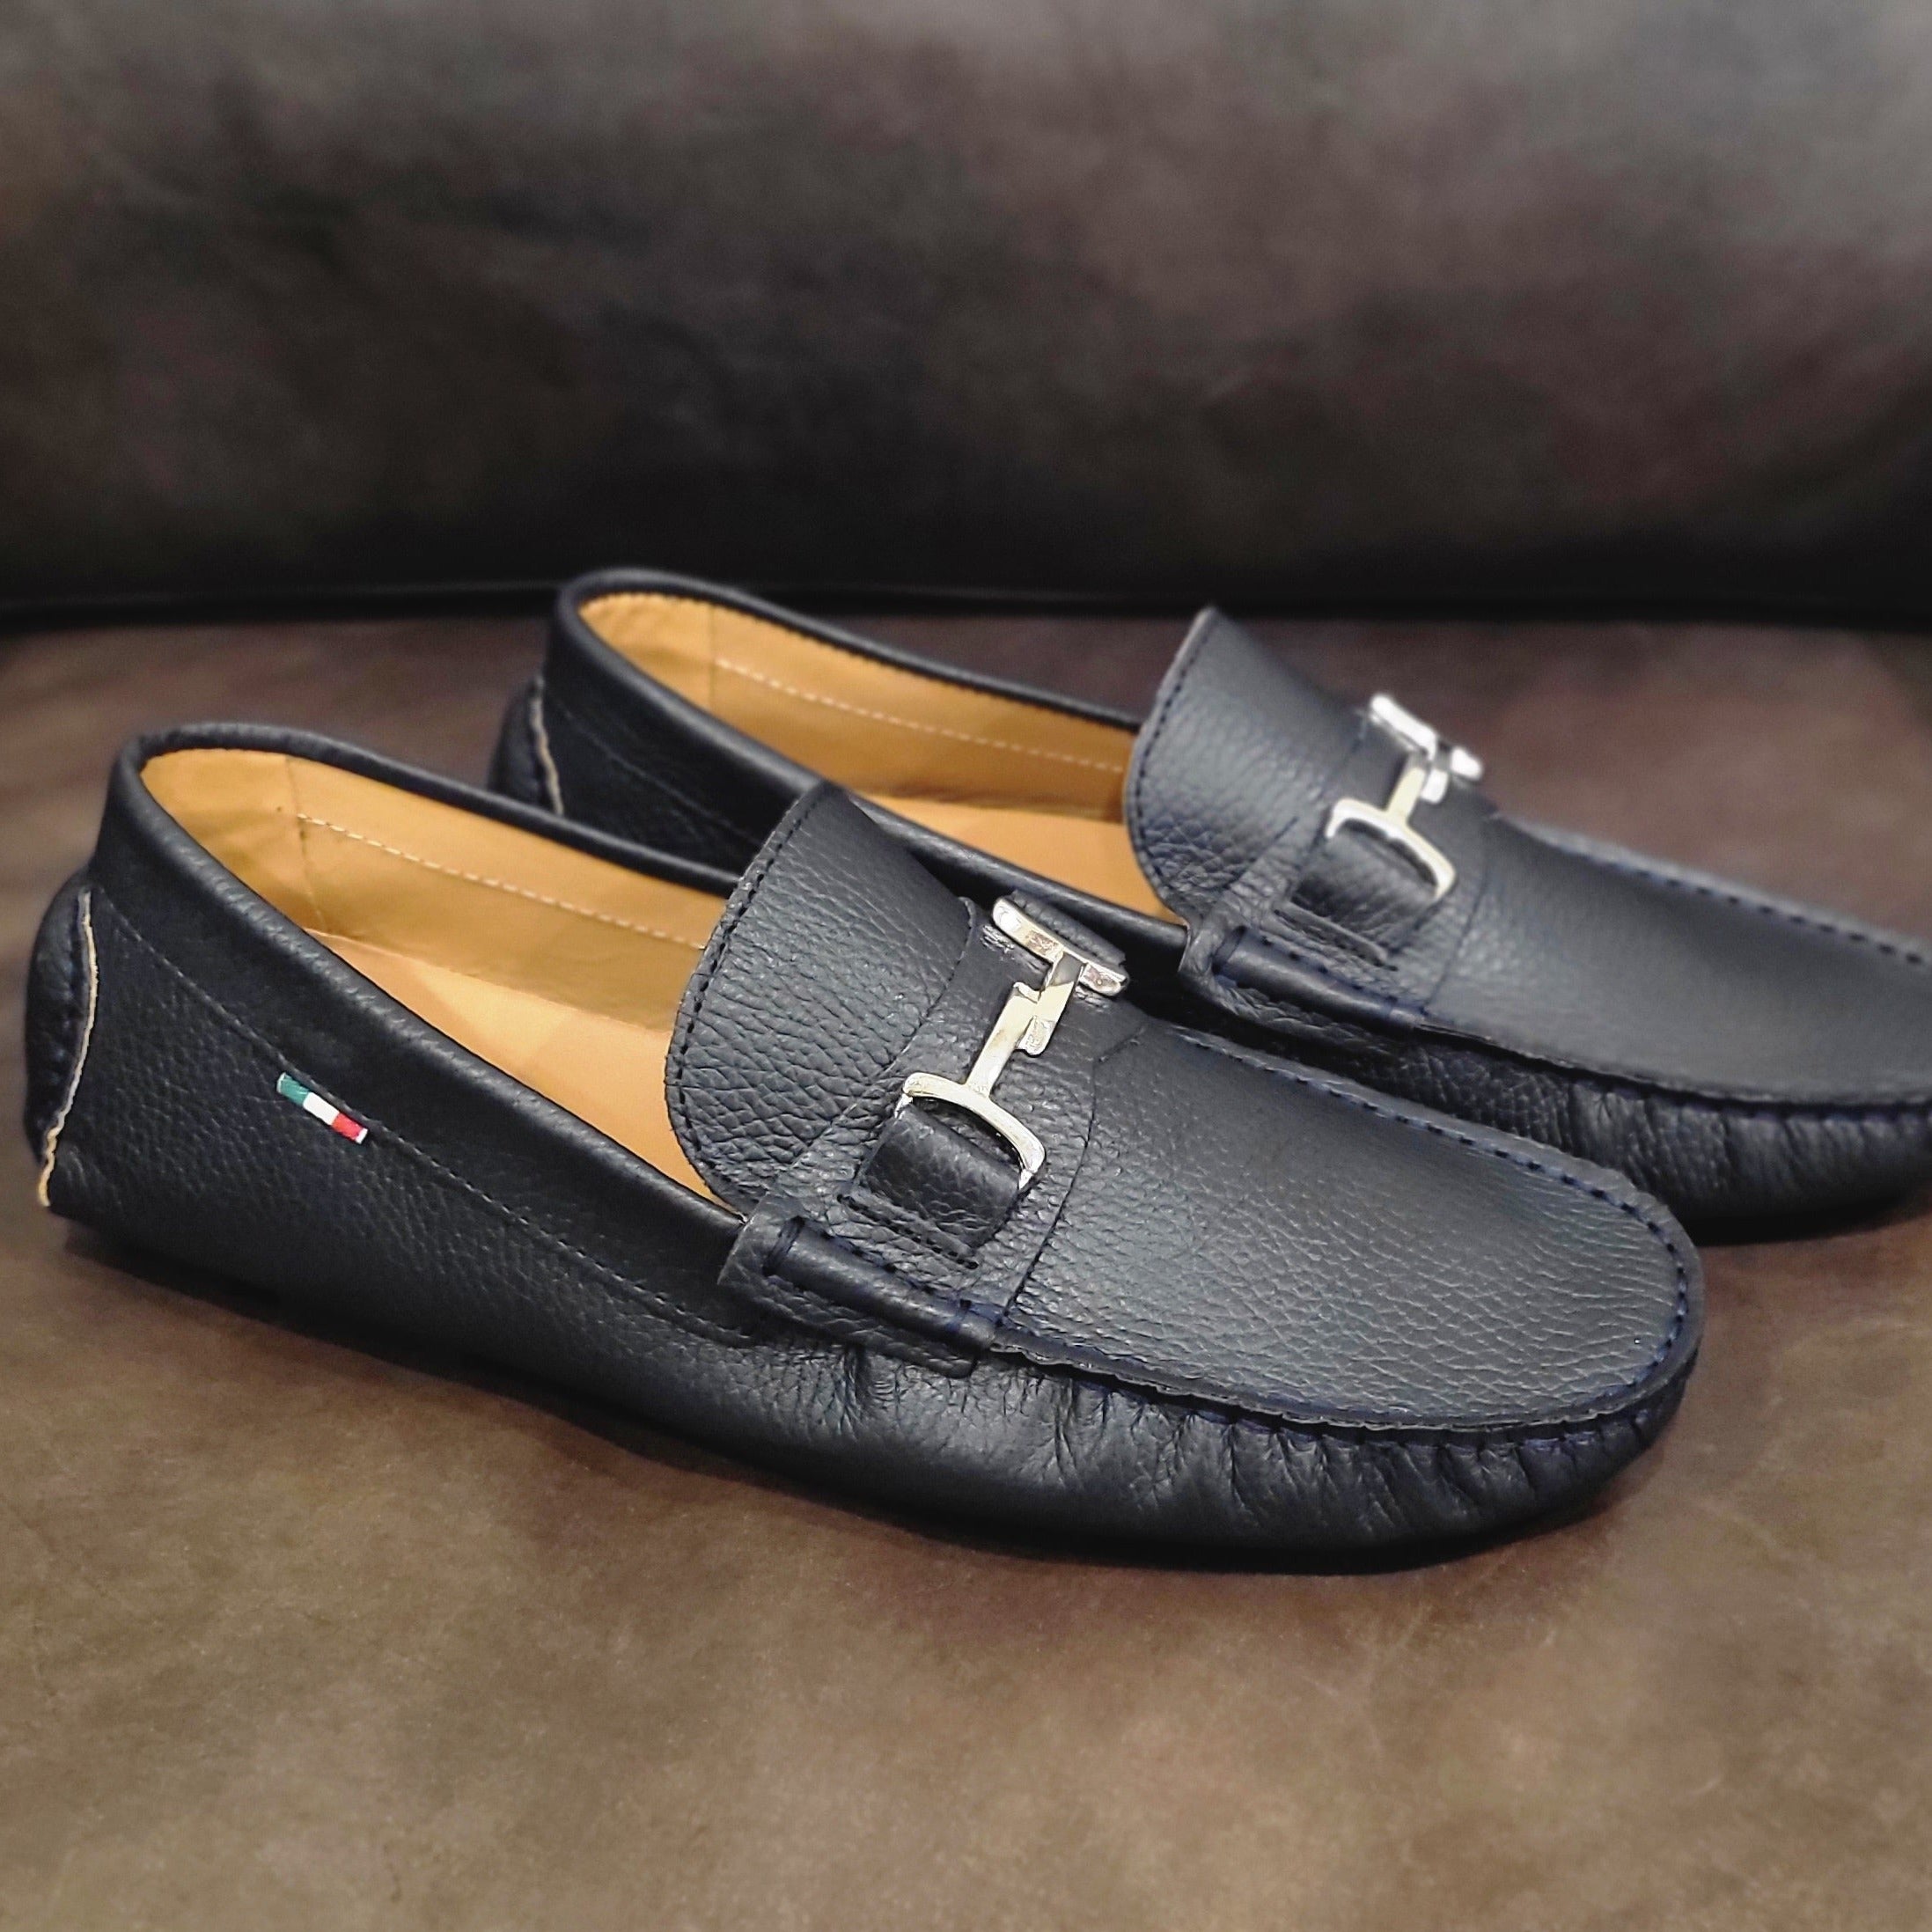 Louis Vuitton Major Loafer Collector Items, Men's Fashion, Footwear, Casual  shoes on Carousell